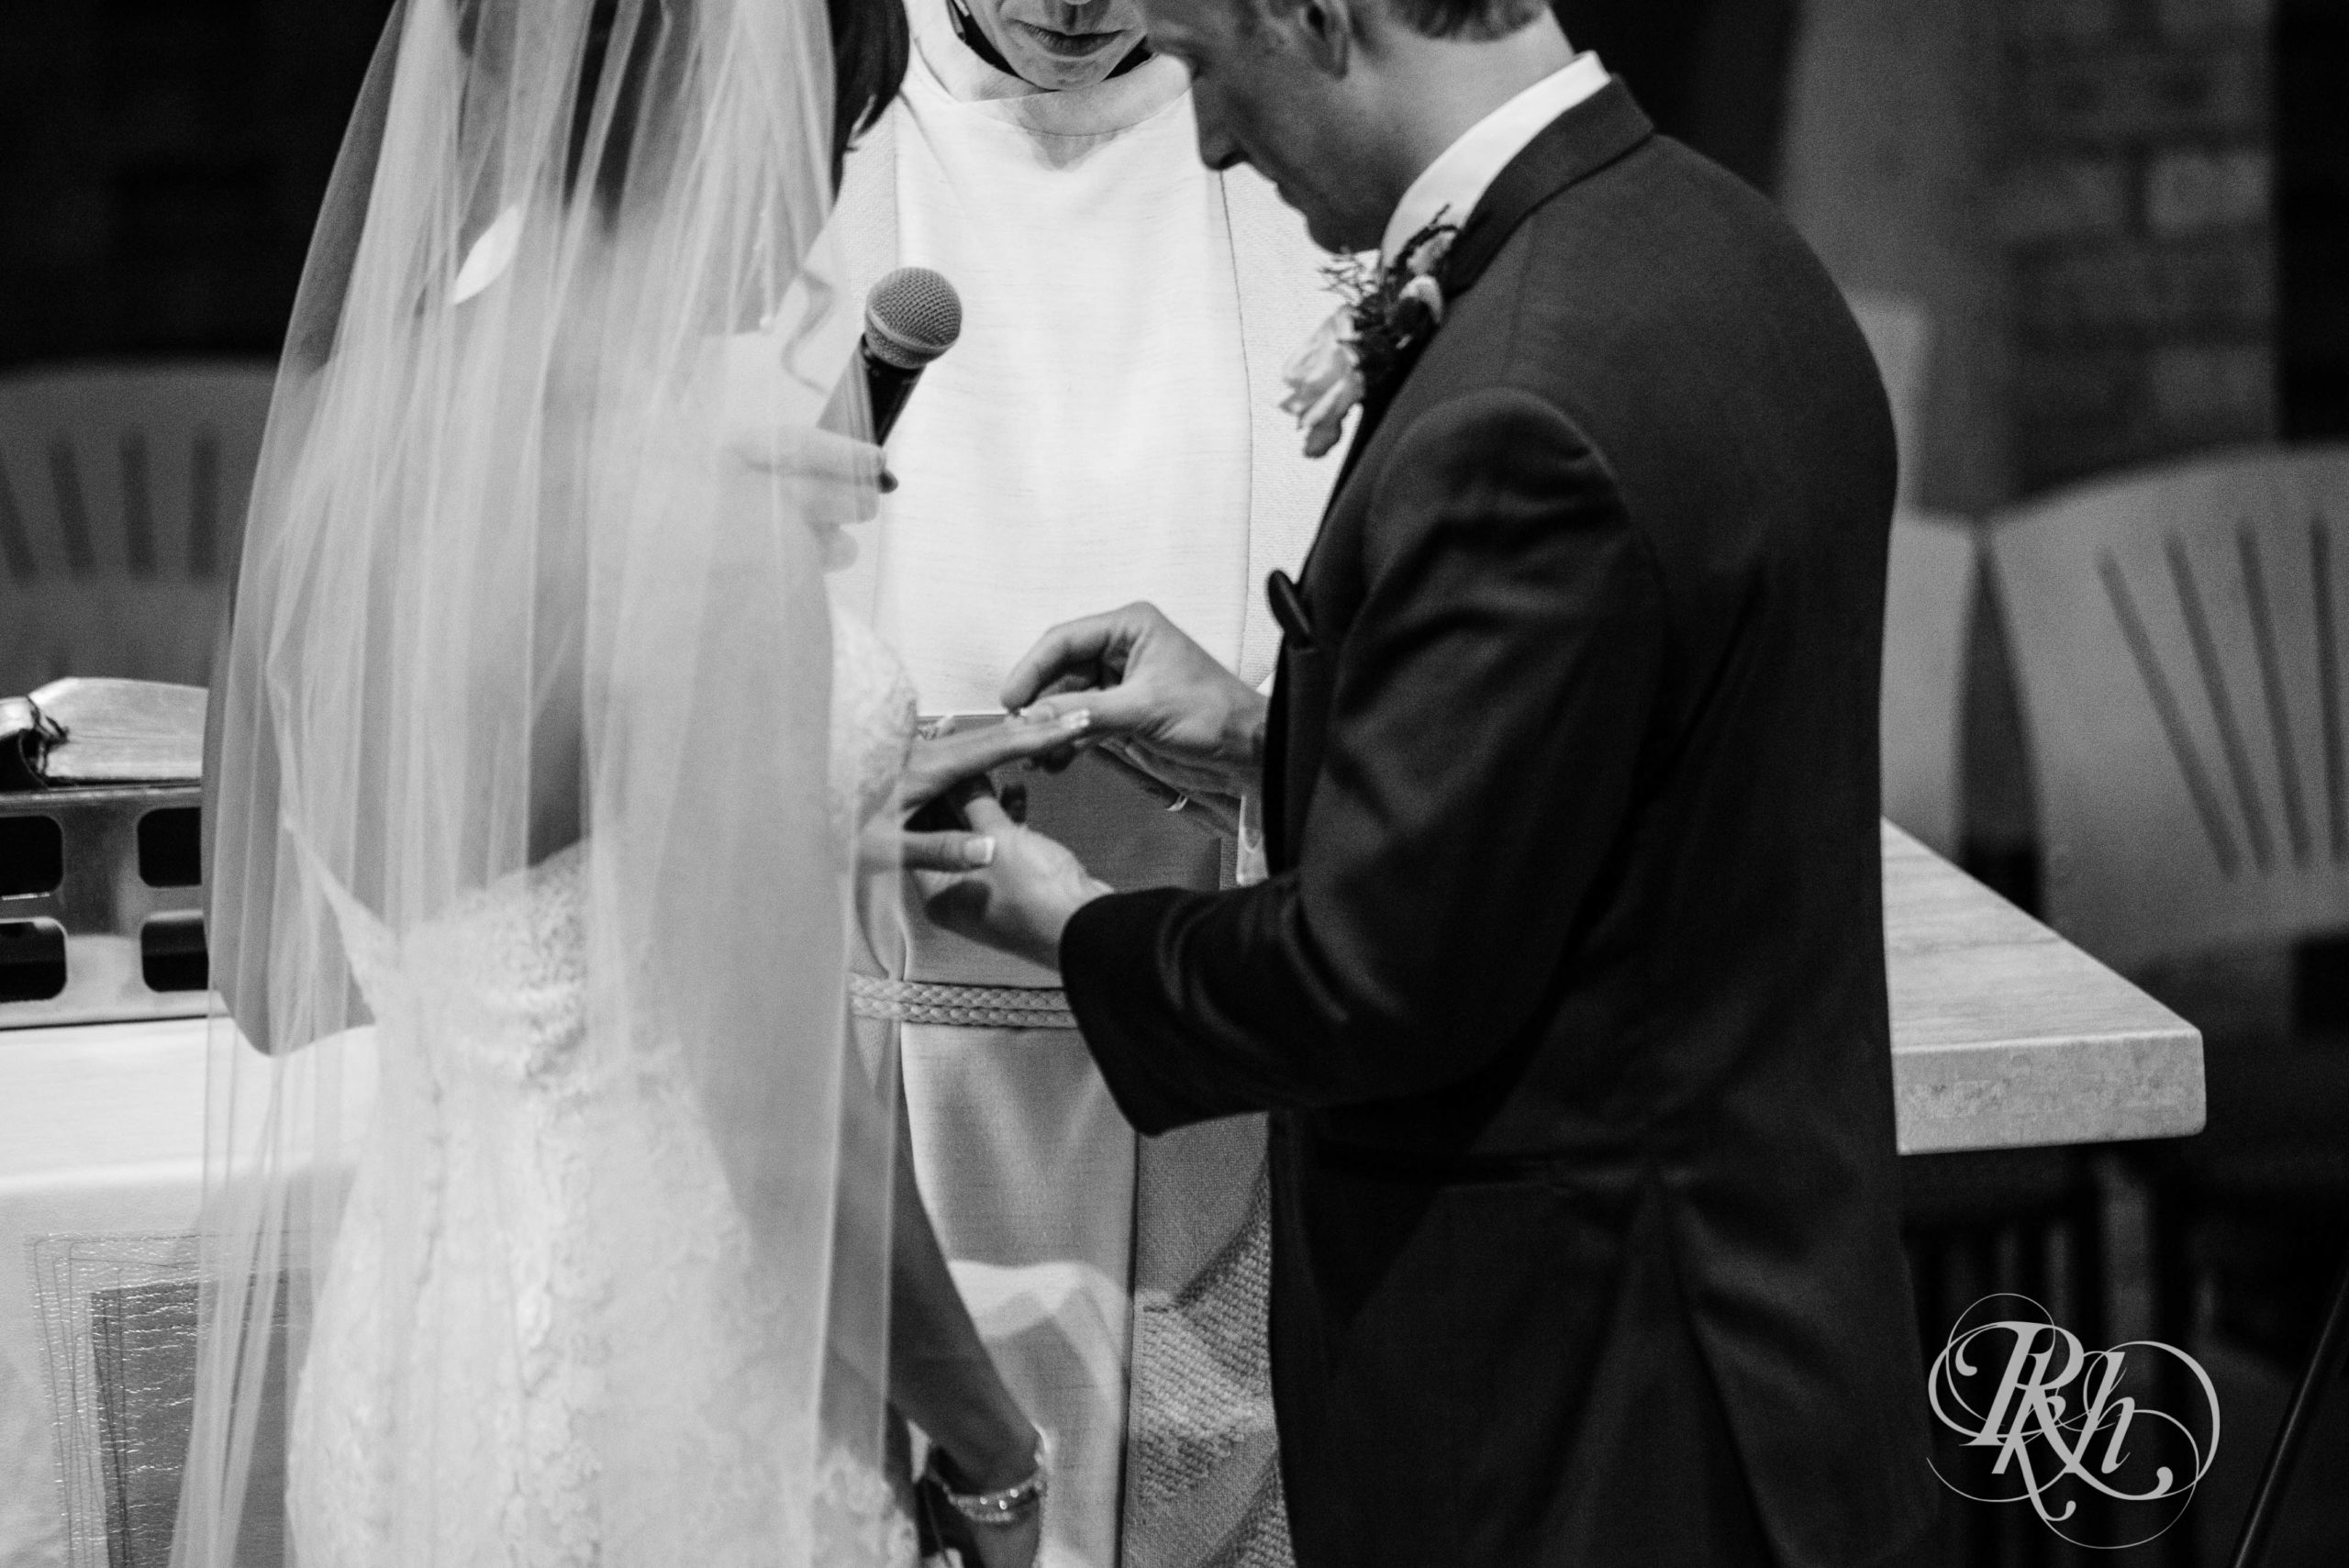 Bride and groom exchange rings at church wedding ceremony in Minneapolis, Minnesota.